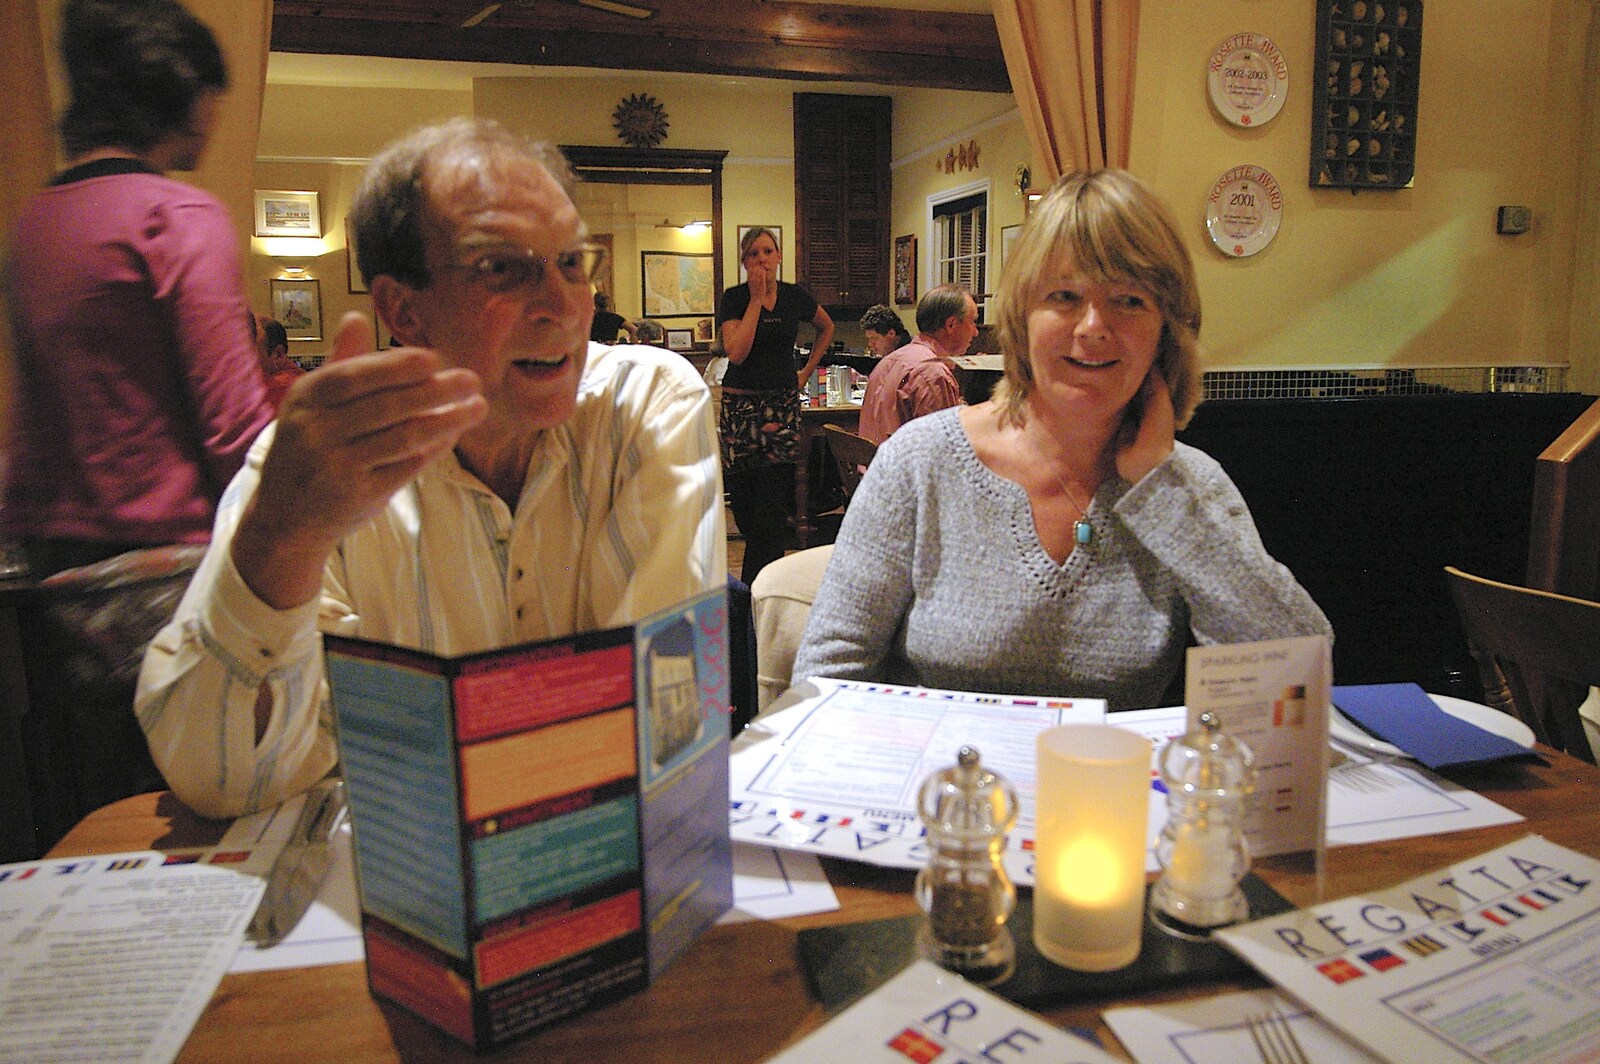 We're in Regatta restaurant for dinner from The Regatta Restaurant with Mother and Mike, Aldeburgh, Suffolk - 10th August 2006